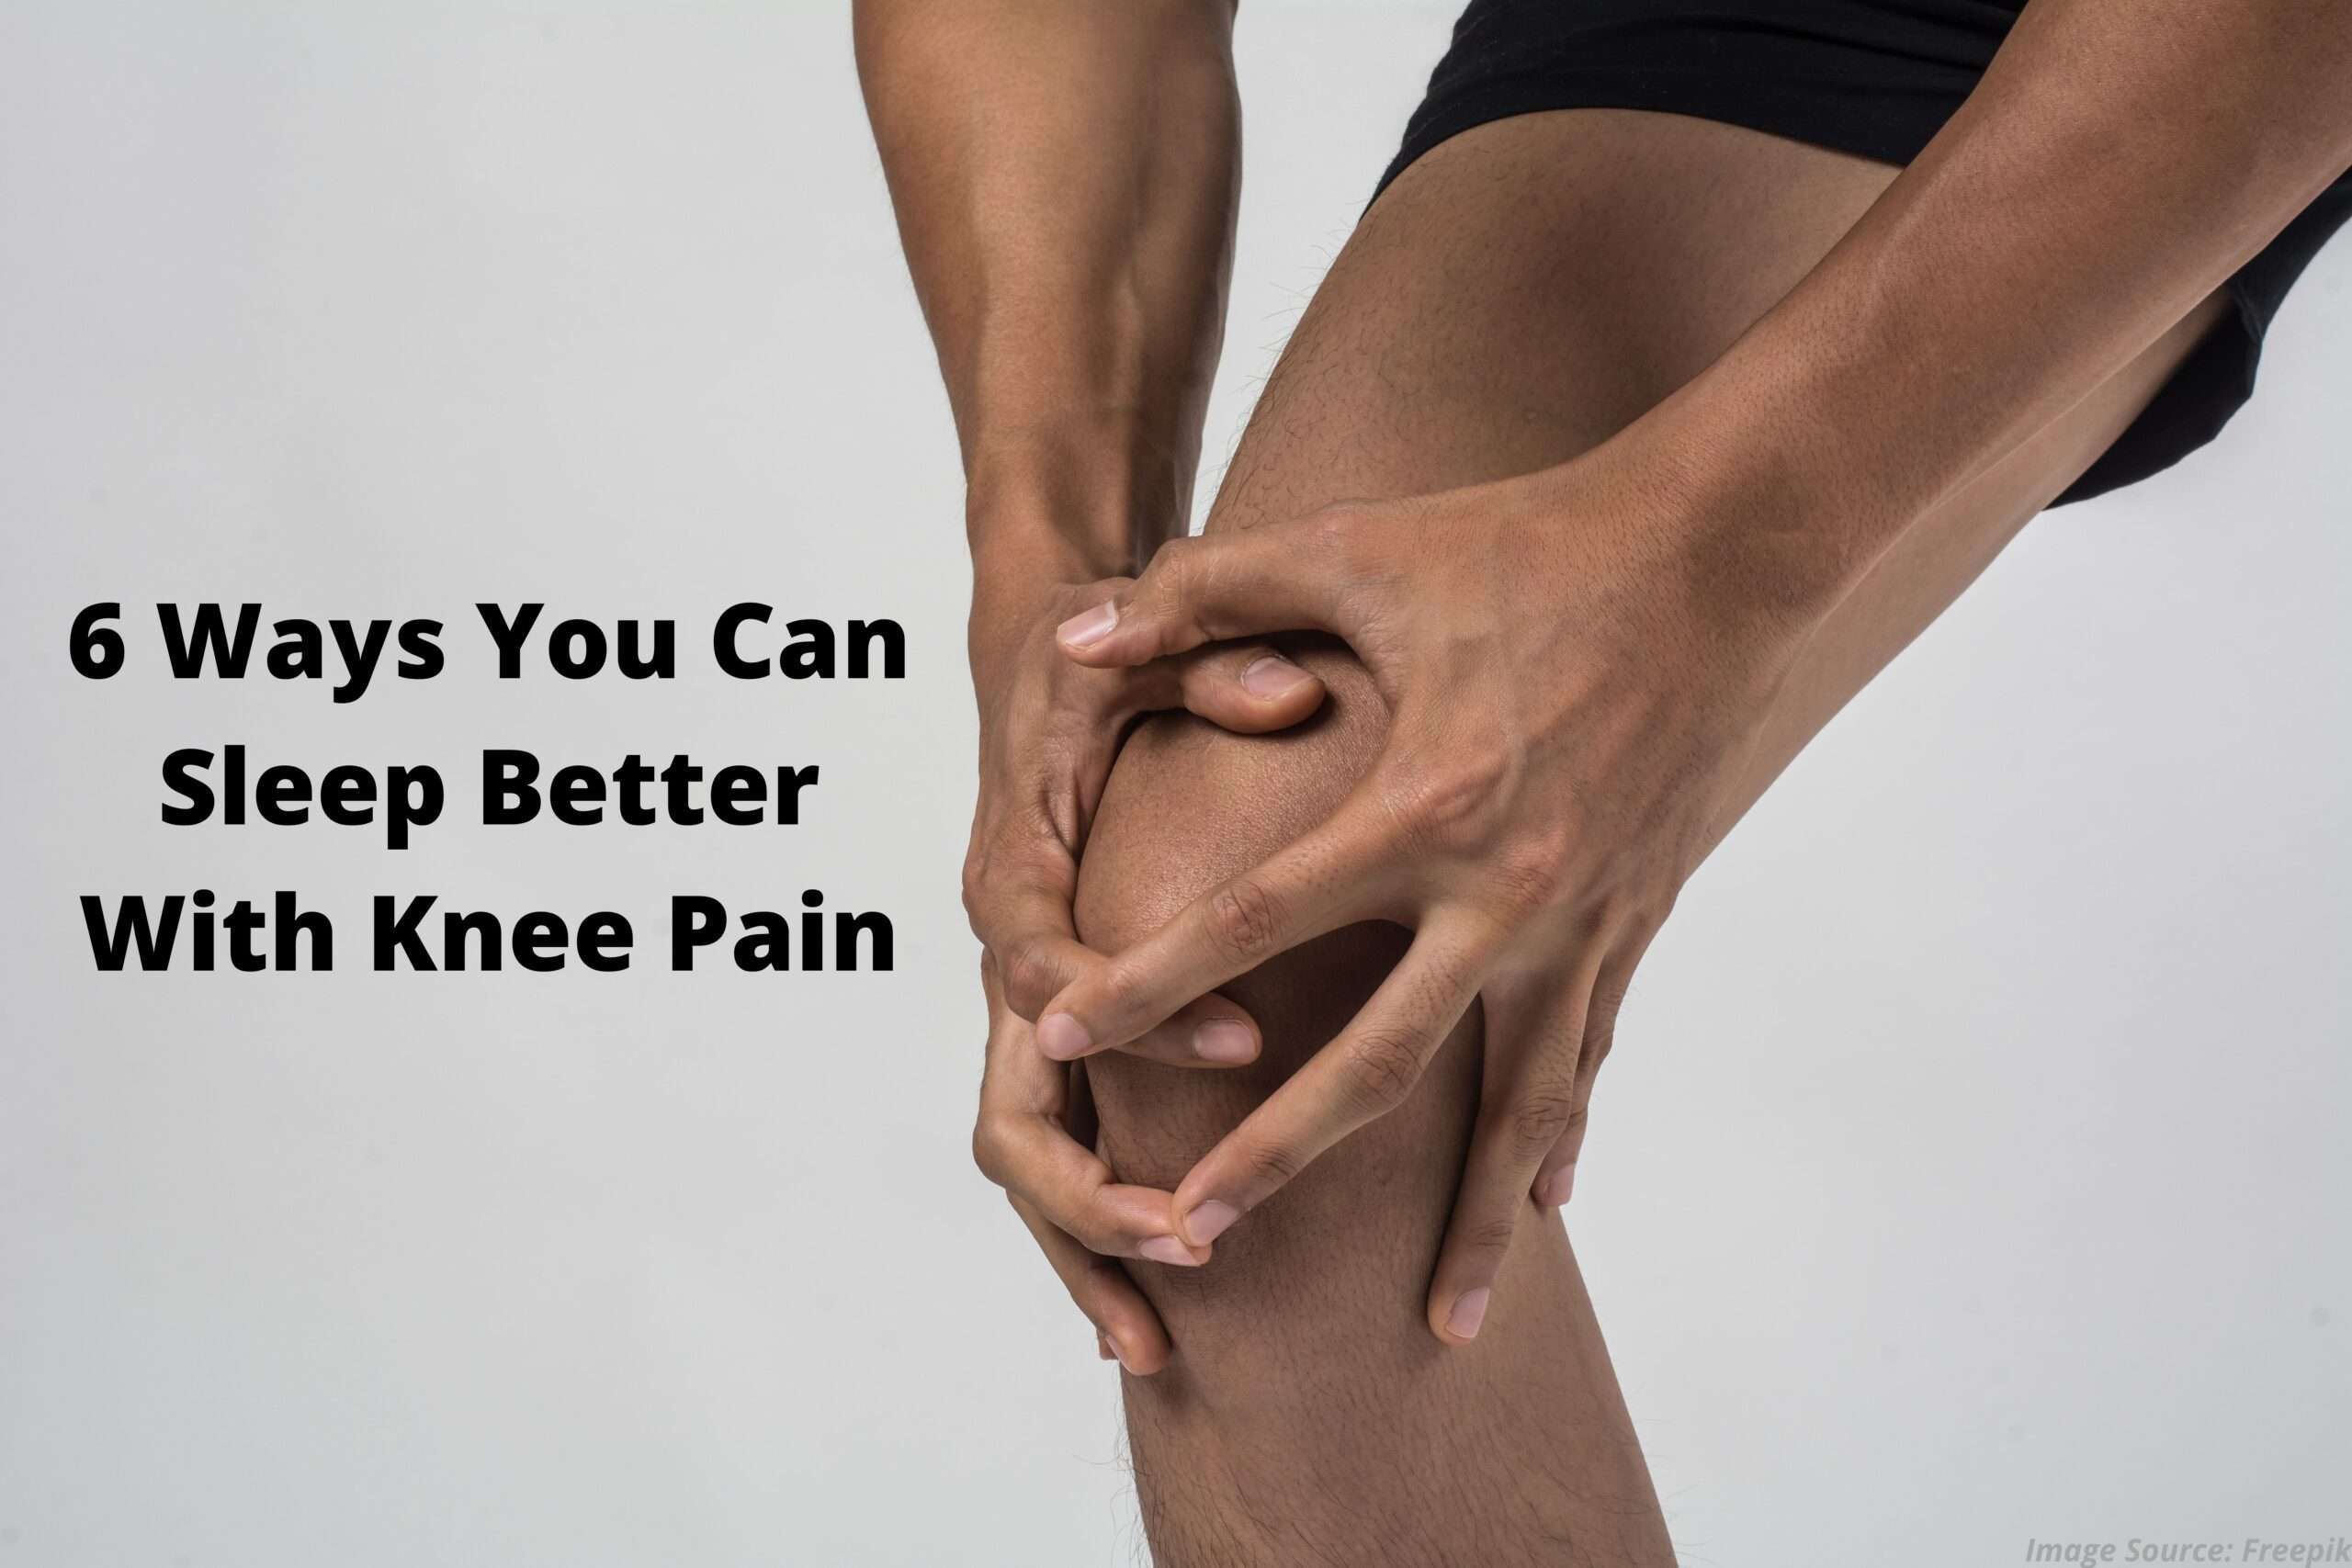 6 Ways You Can Sleep Better With Knee Pain